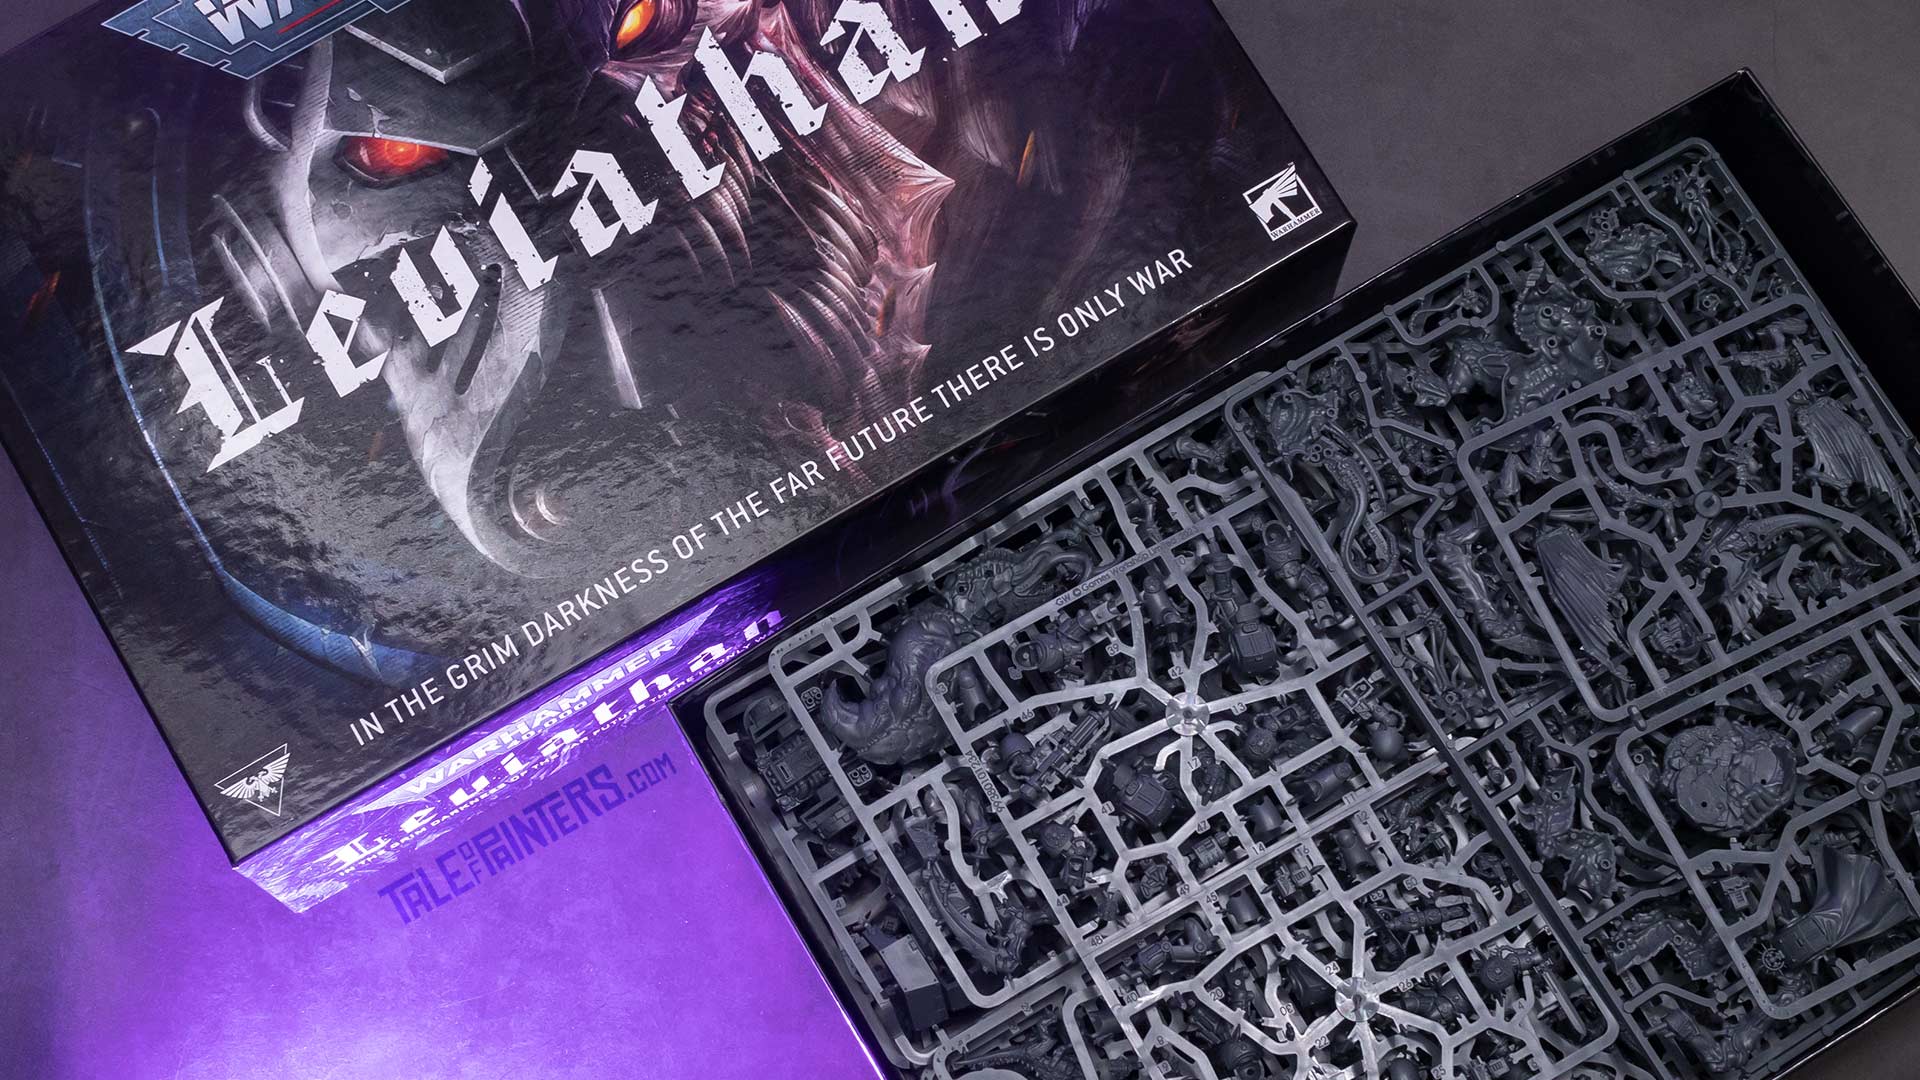 Warhammer 40.000 Leviathan unboxing & review, open box on concrete background